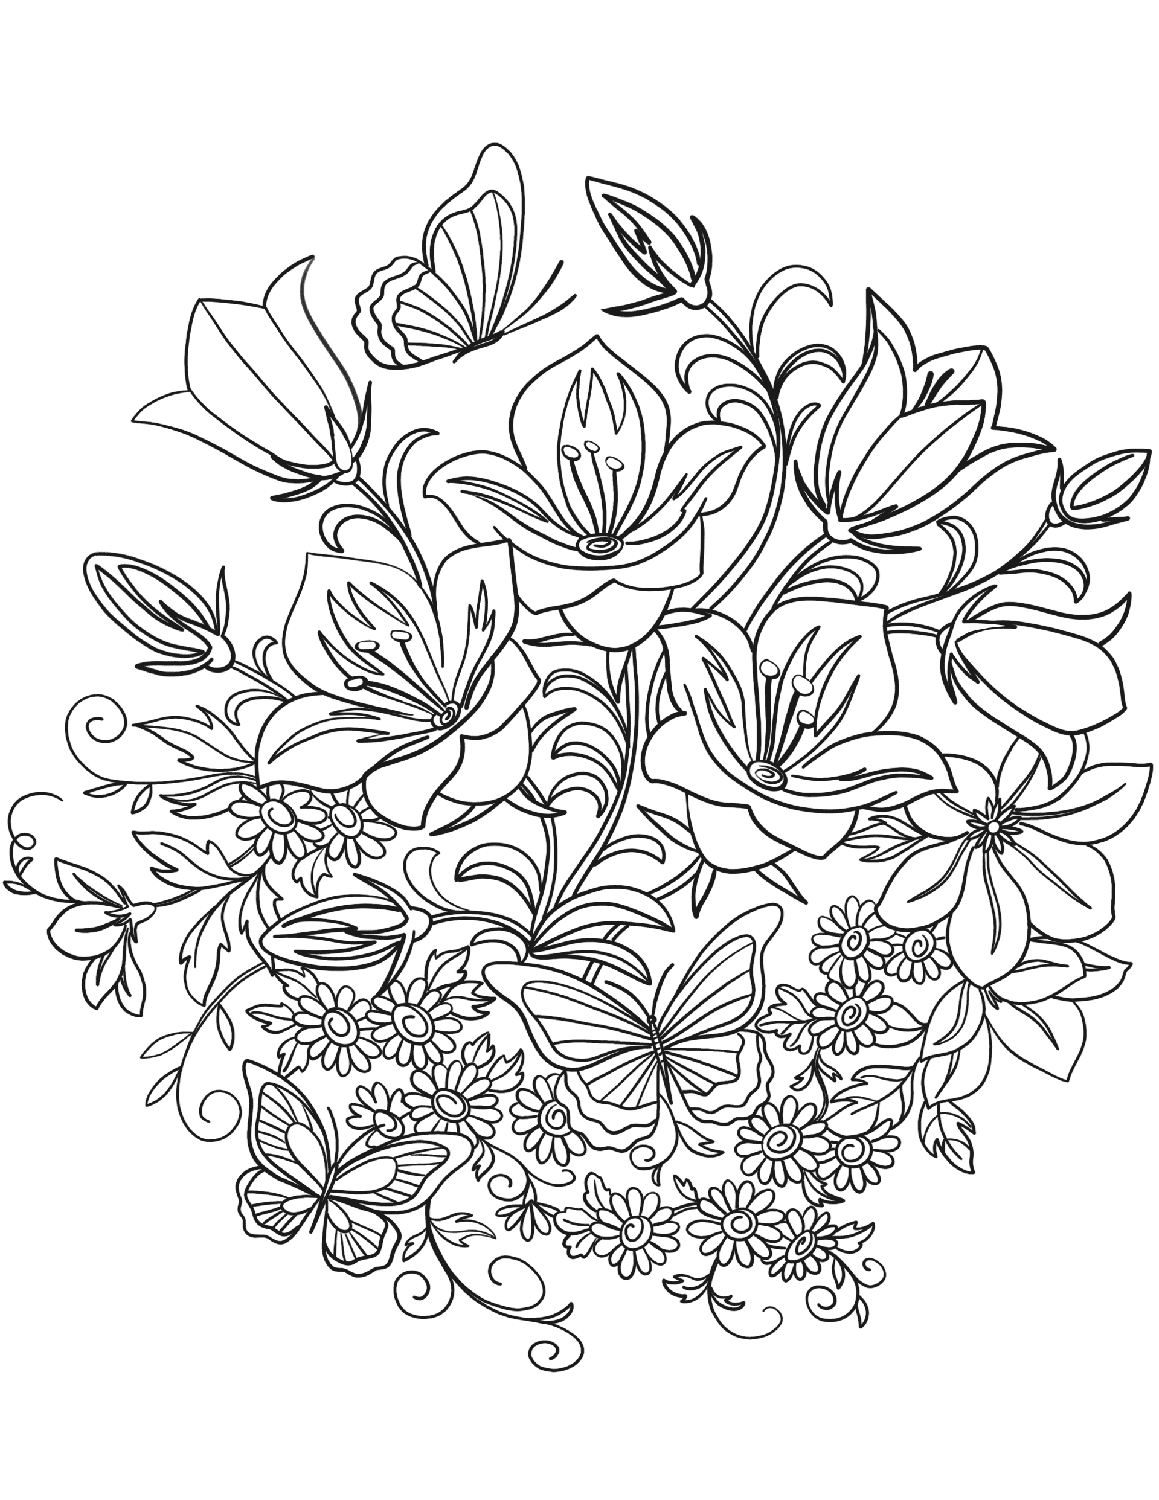 butterfly-and-flowers-coloring-page-colouringpages